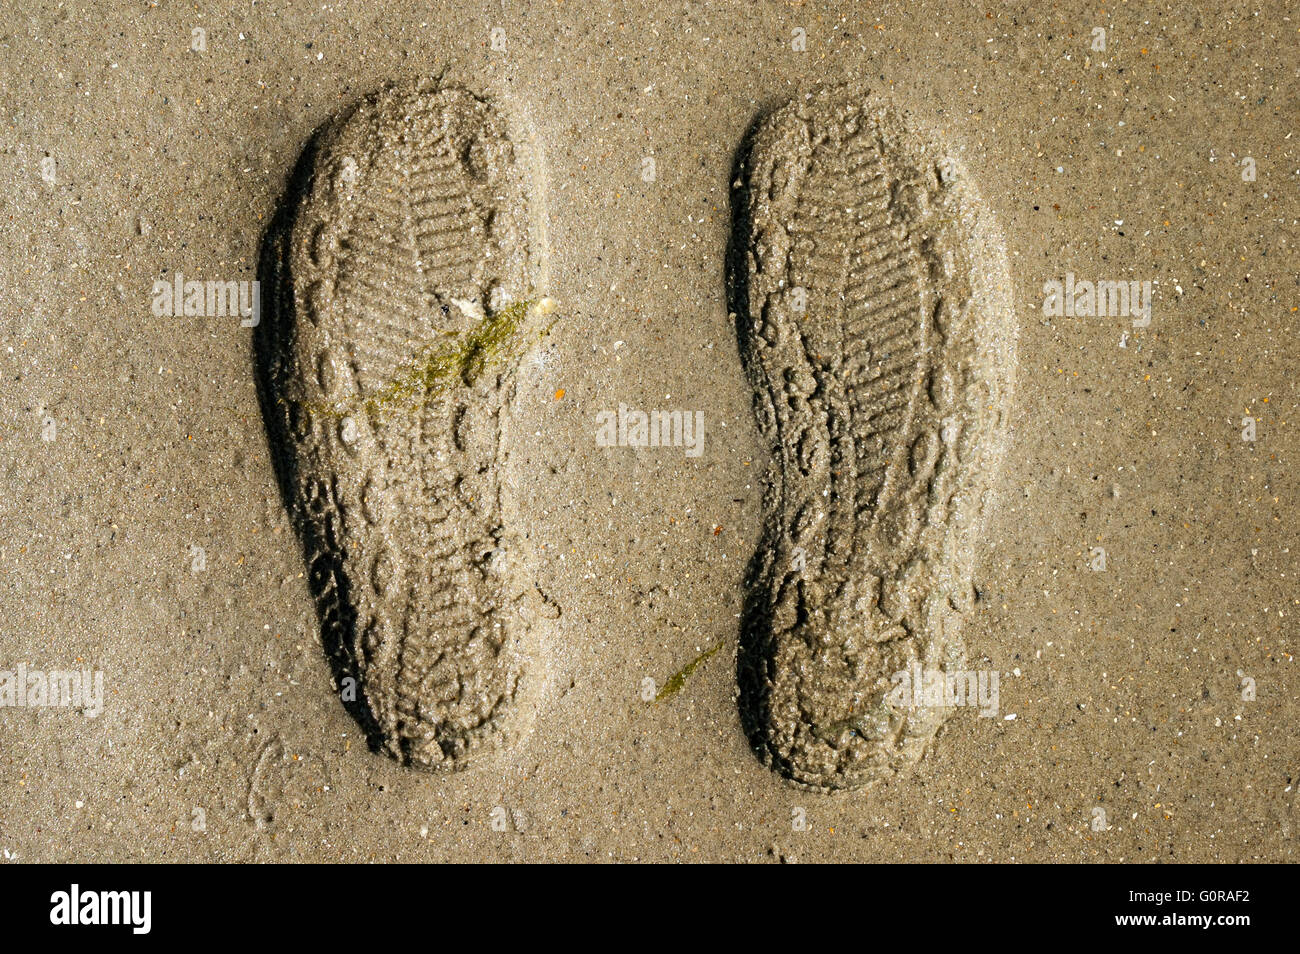 Prints of shoe soles in the sand Stock Photo